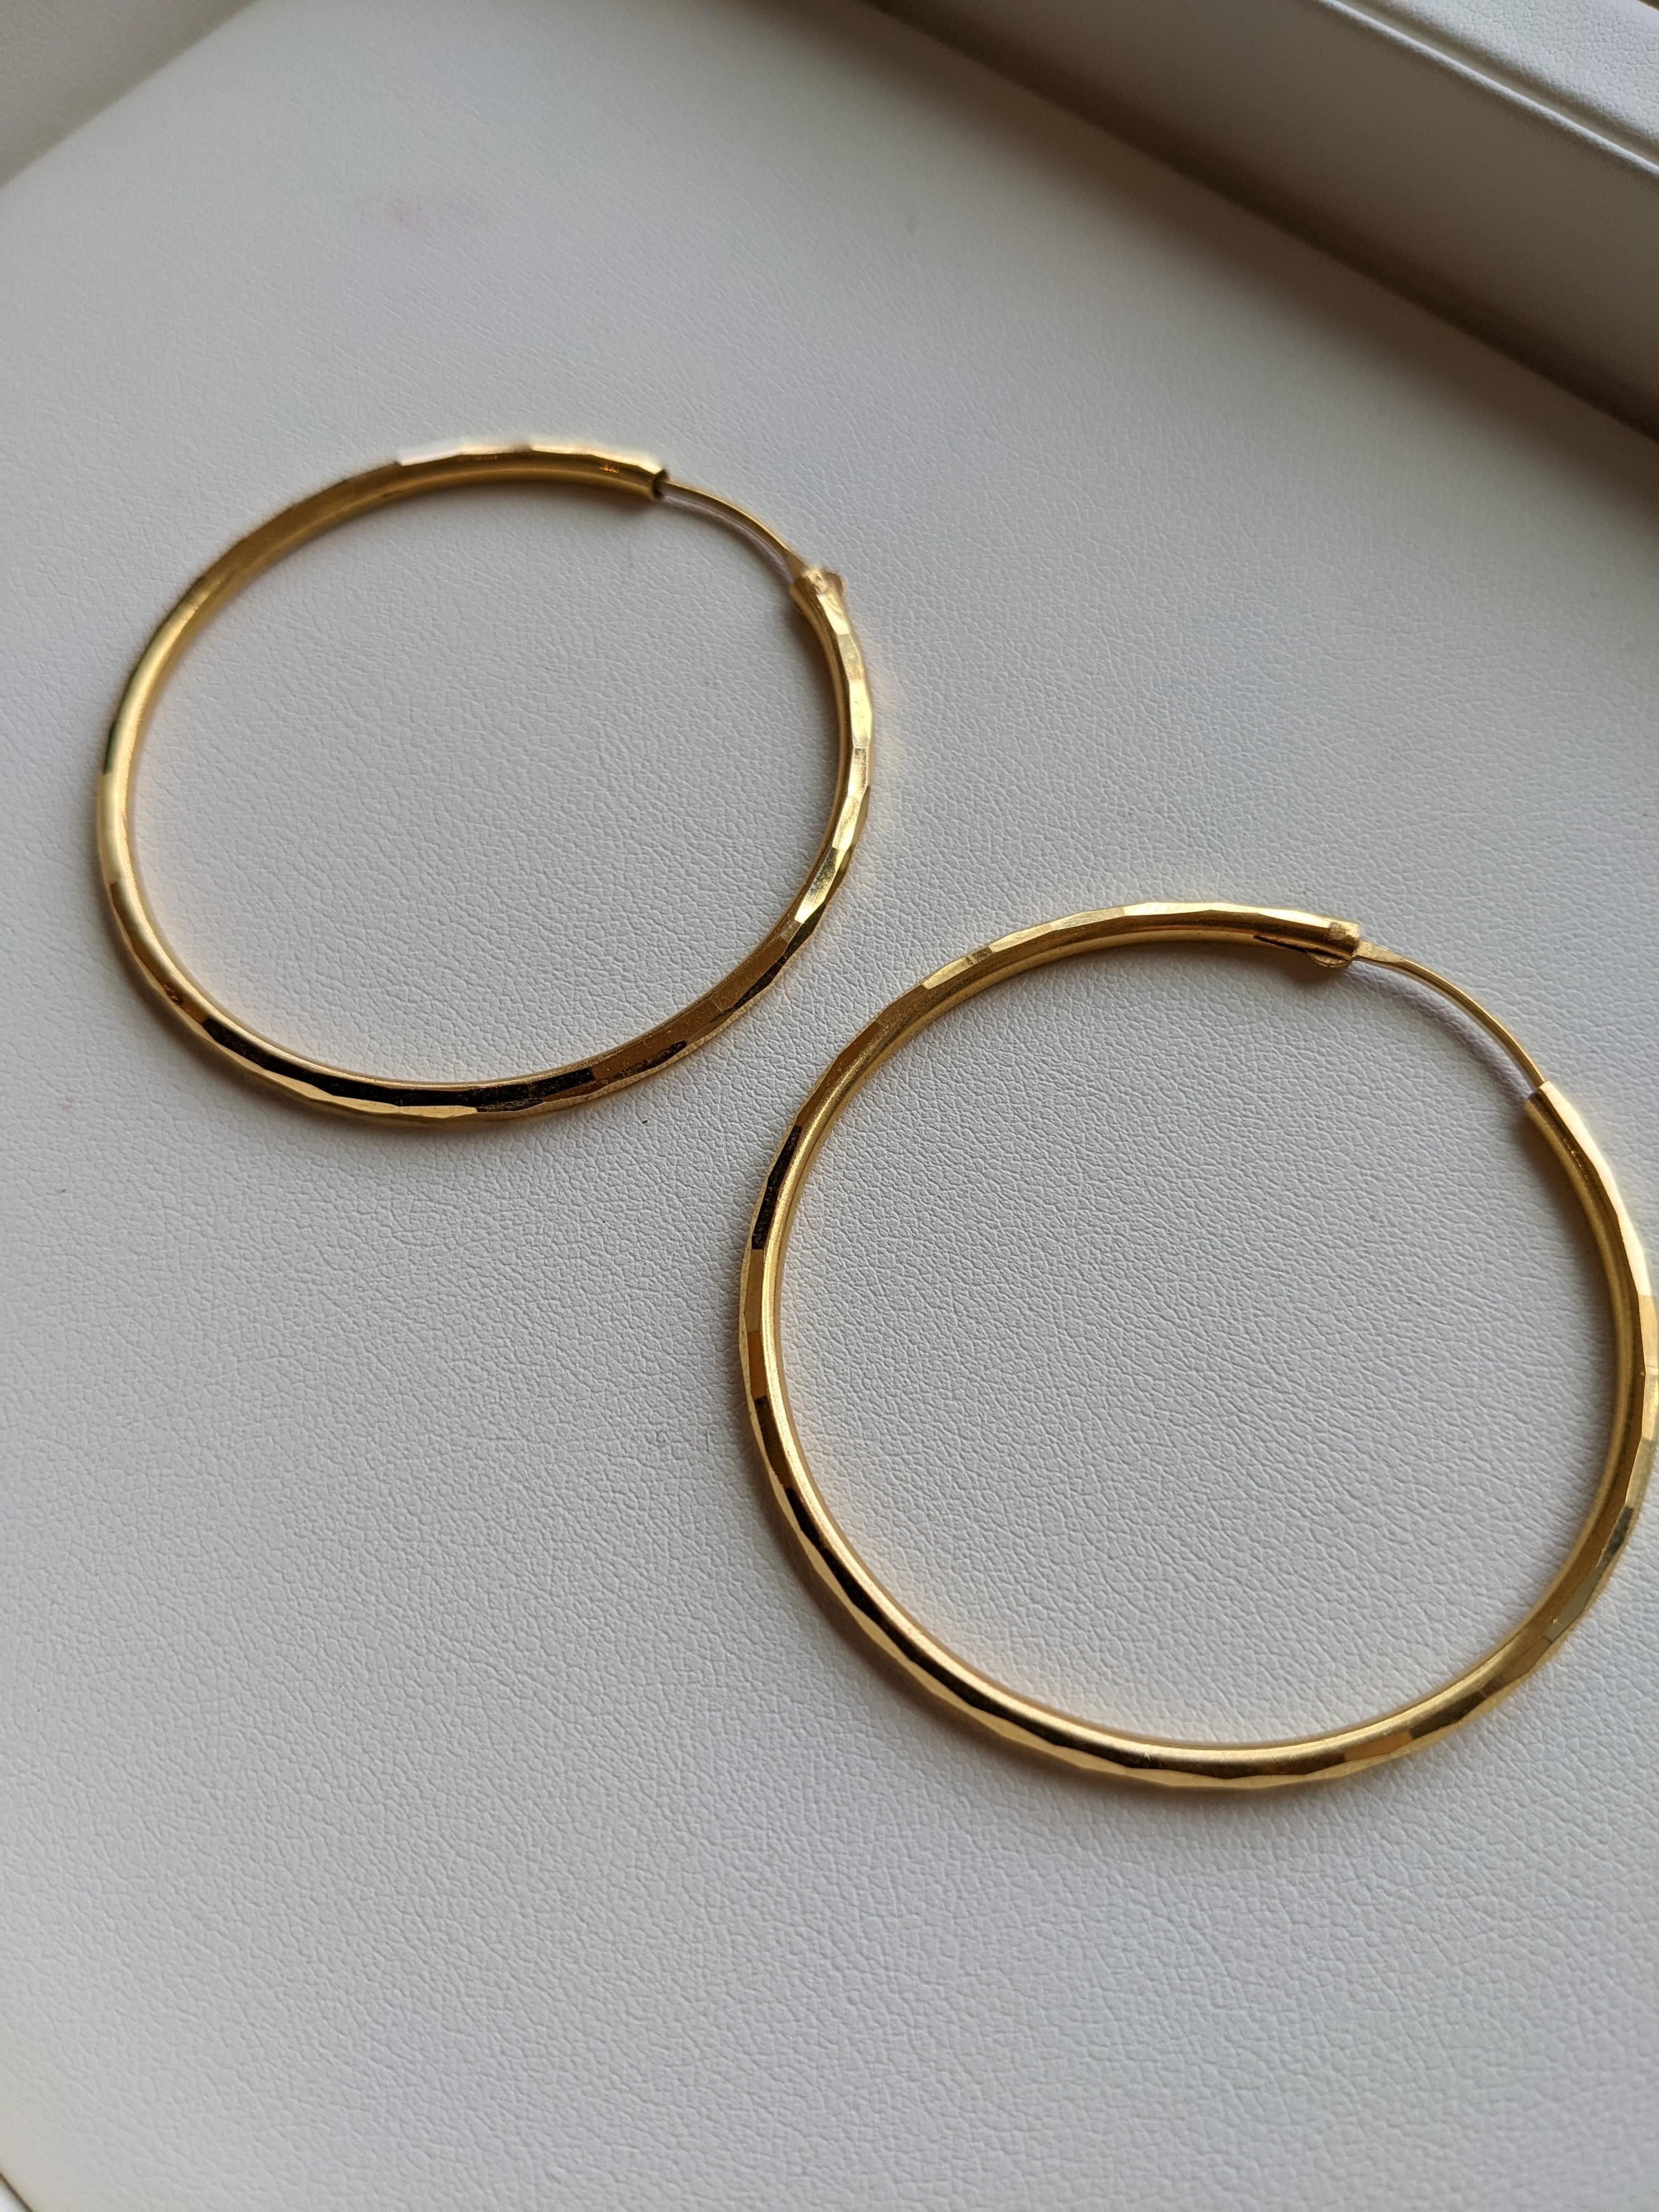 These lovely sparkly hoop earrings are authentic antiques from India. They are a gorgeous deep yellow colour due to the high karat of gold. They are in excellent shape and have minimal signs of wear and tear. They have a flex post that fits inside